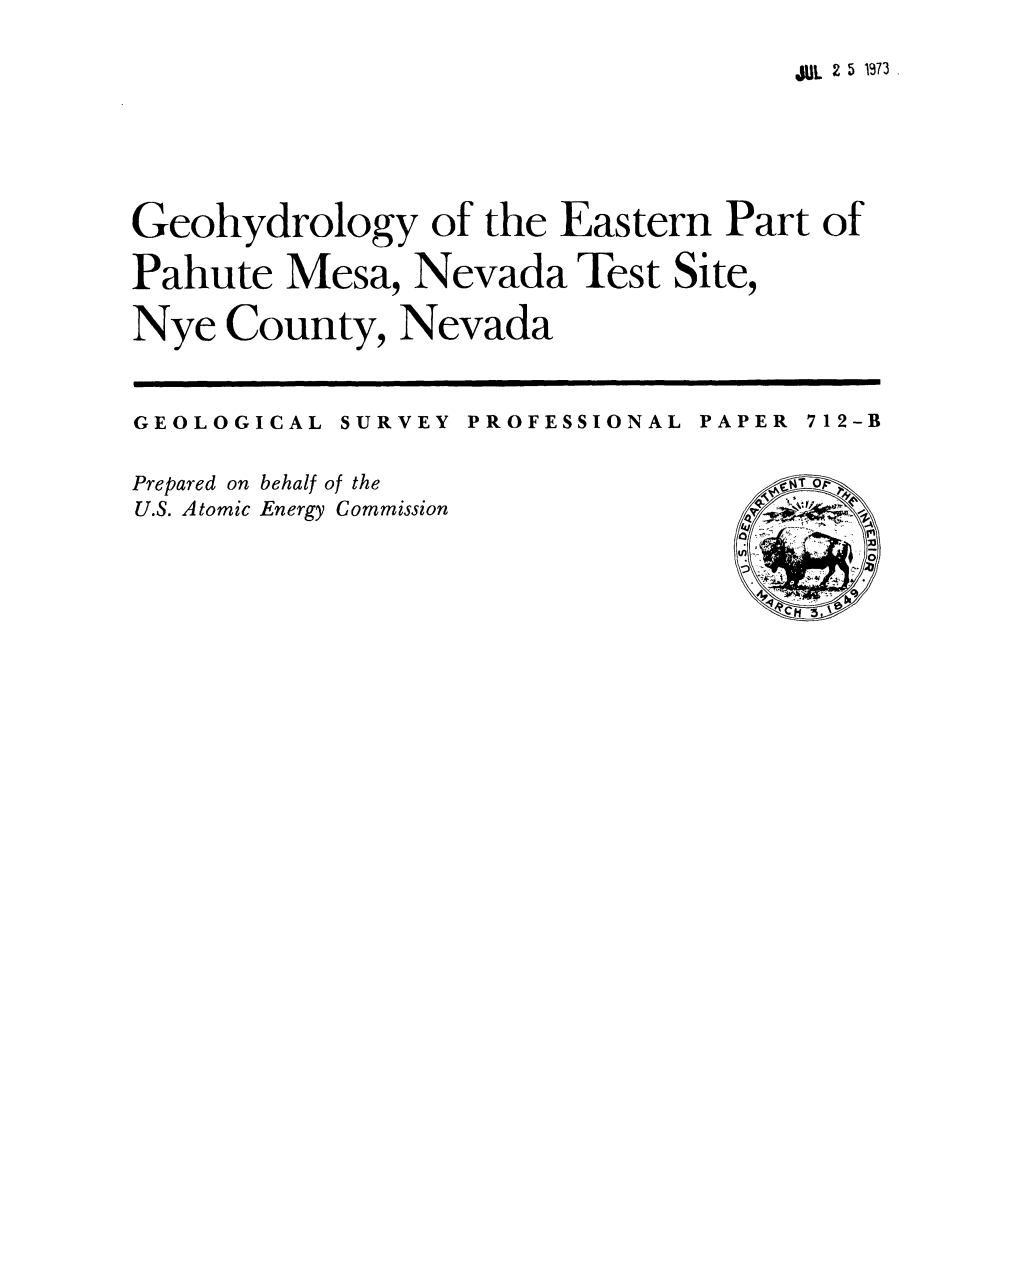 Geohydrology of the Eastern Part of Pahute Mesa, Nevada Test Site, Nye County, Nevada